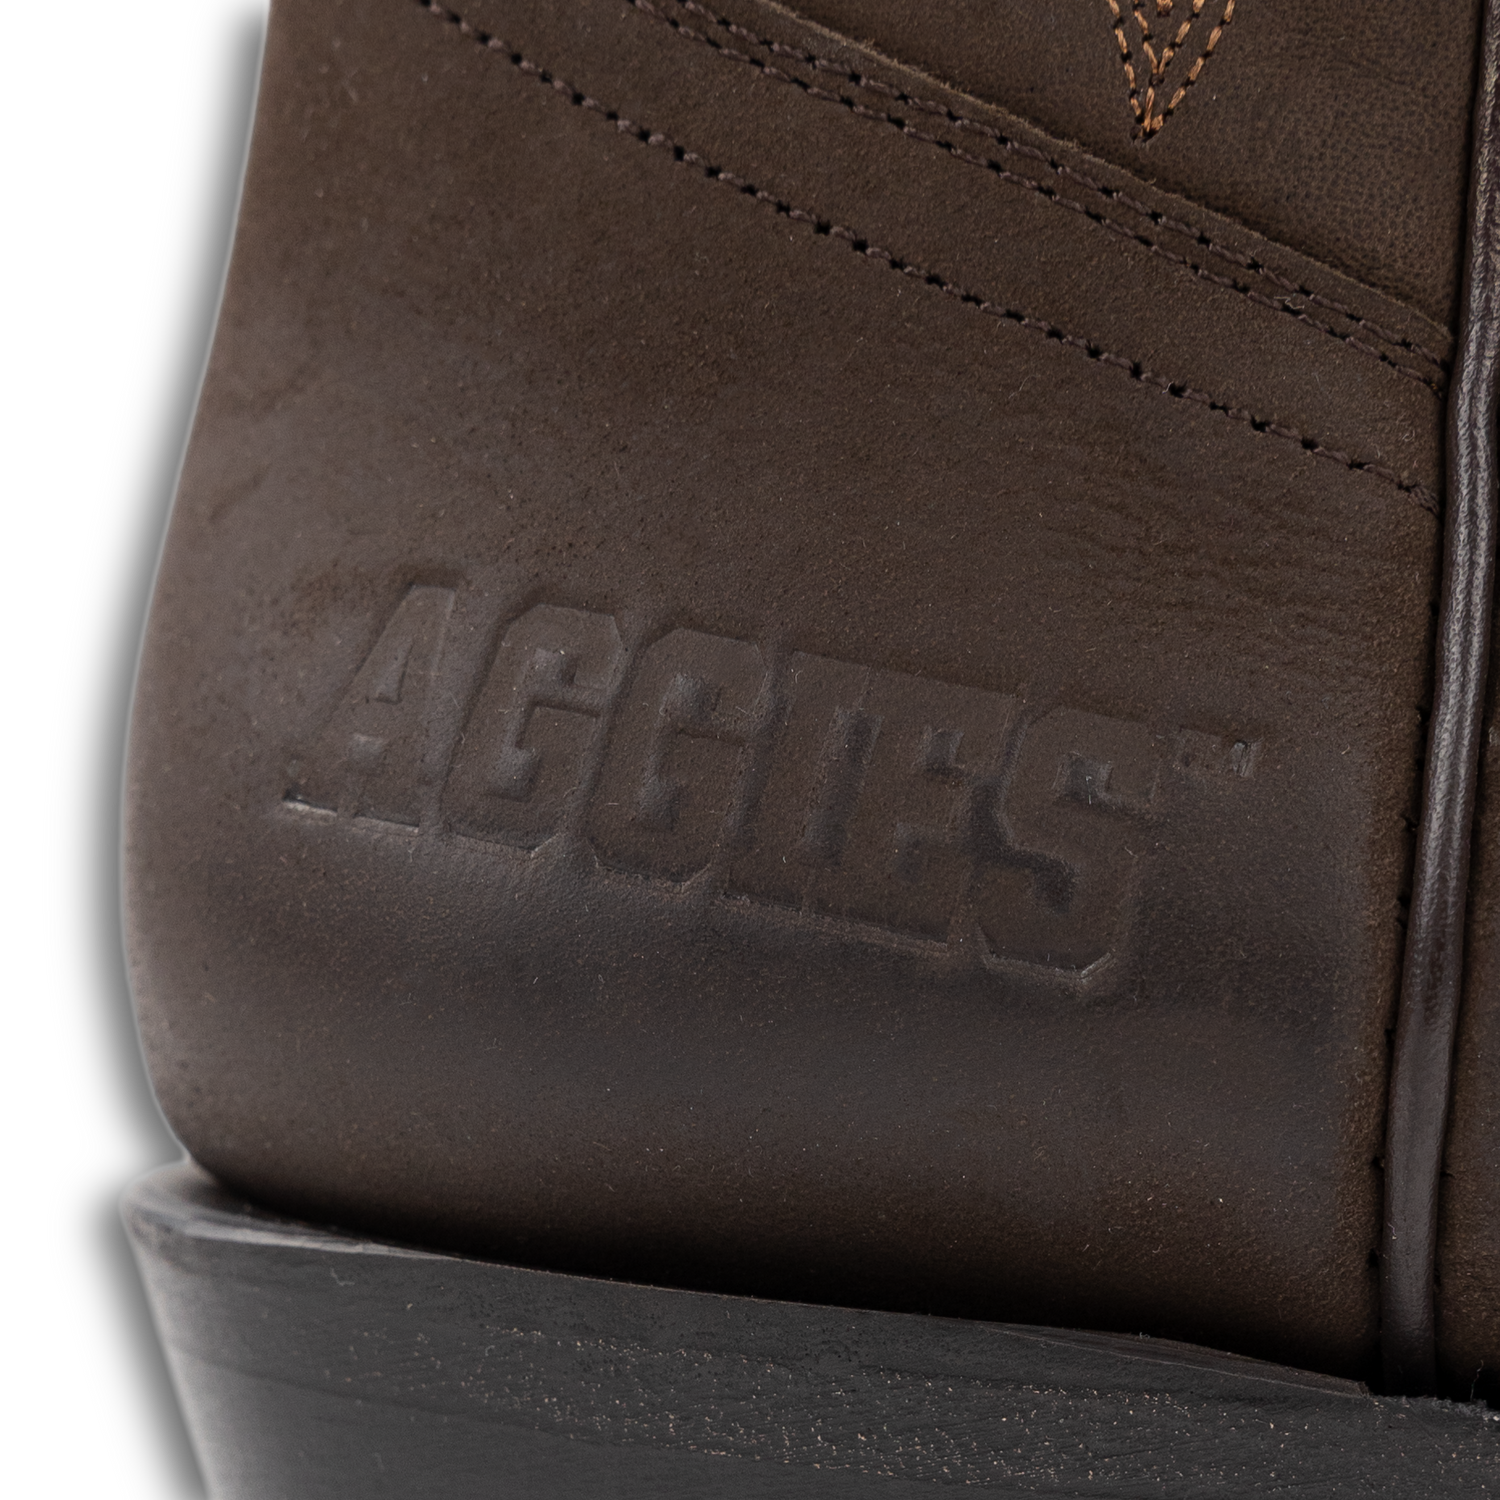 Texas A&M Women's Gameday Brown Boots